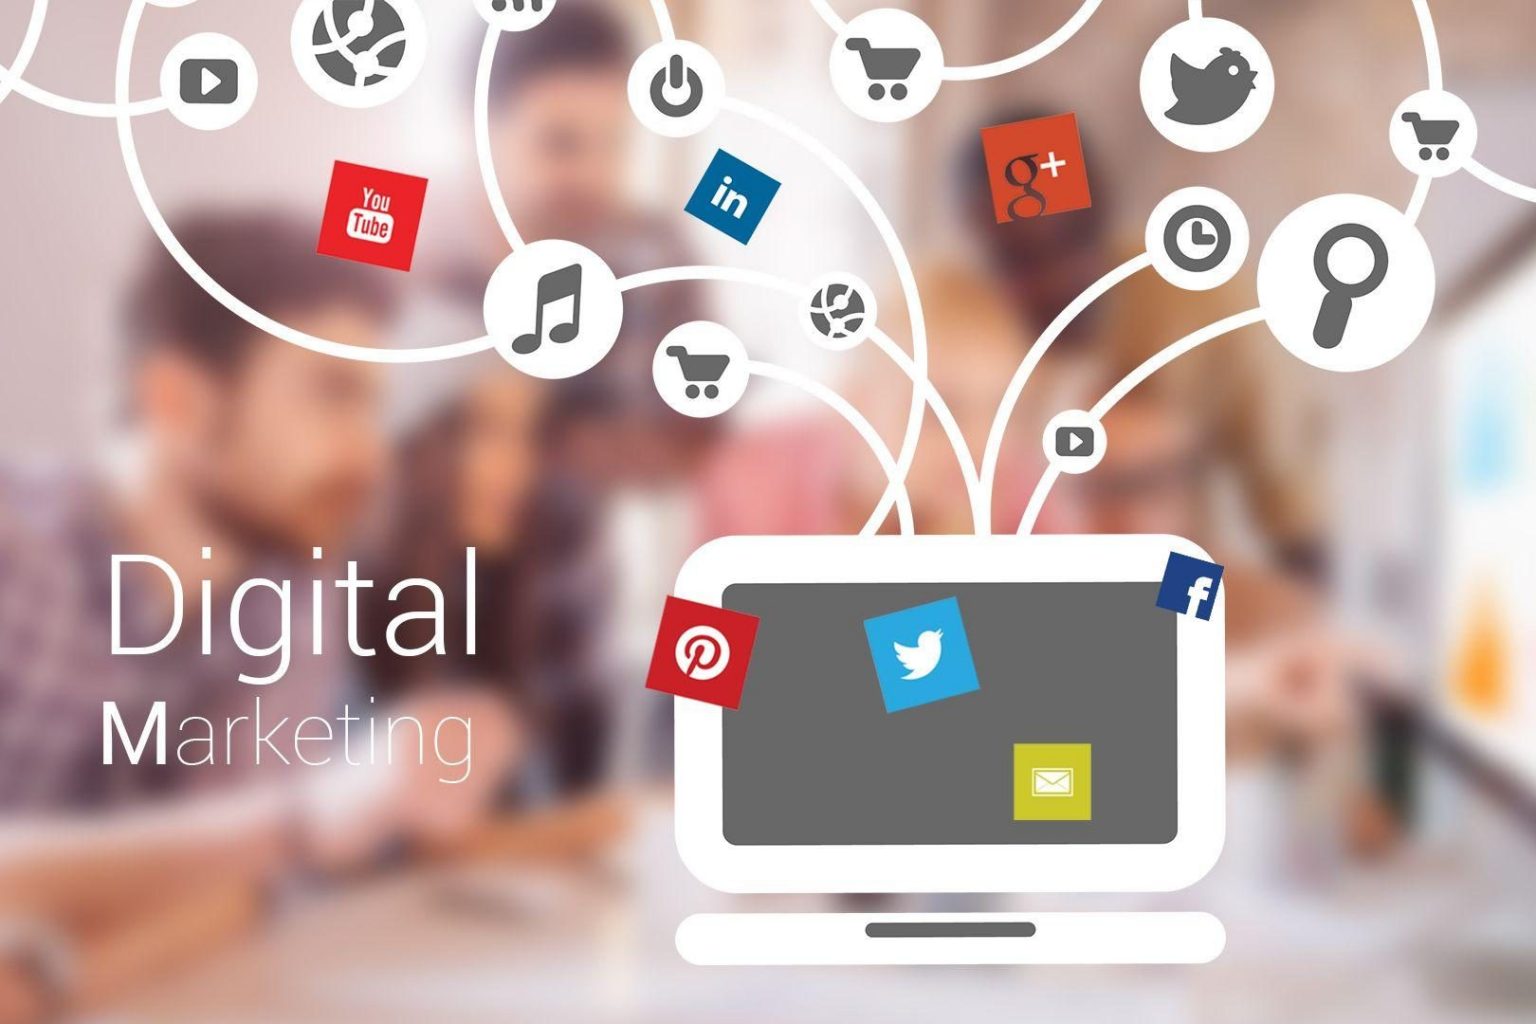 Digital Marketing Important For Small Companies